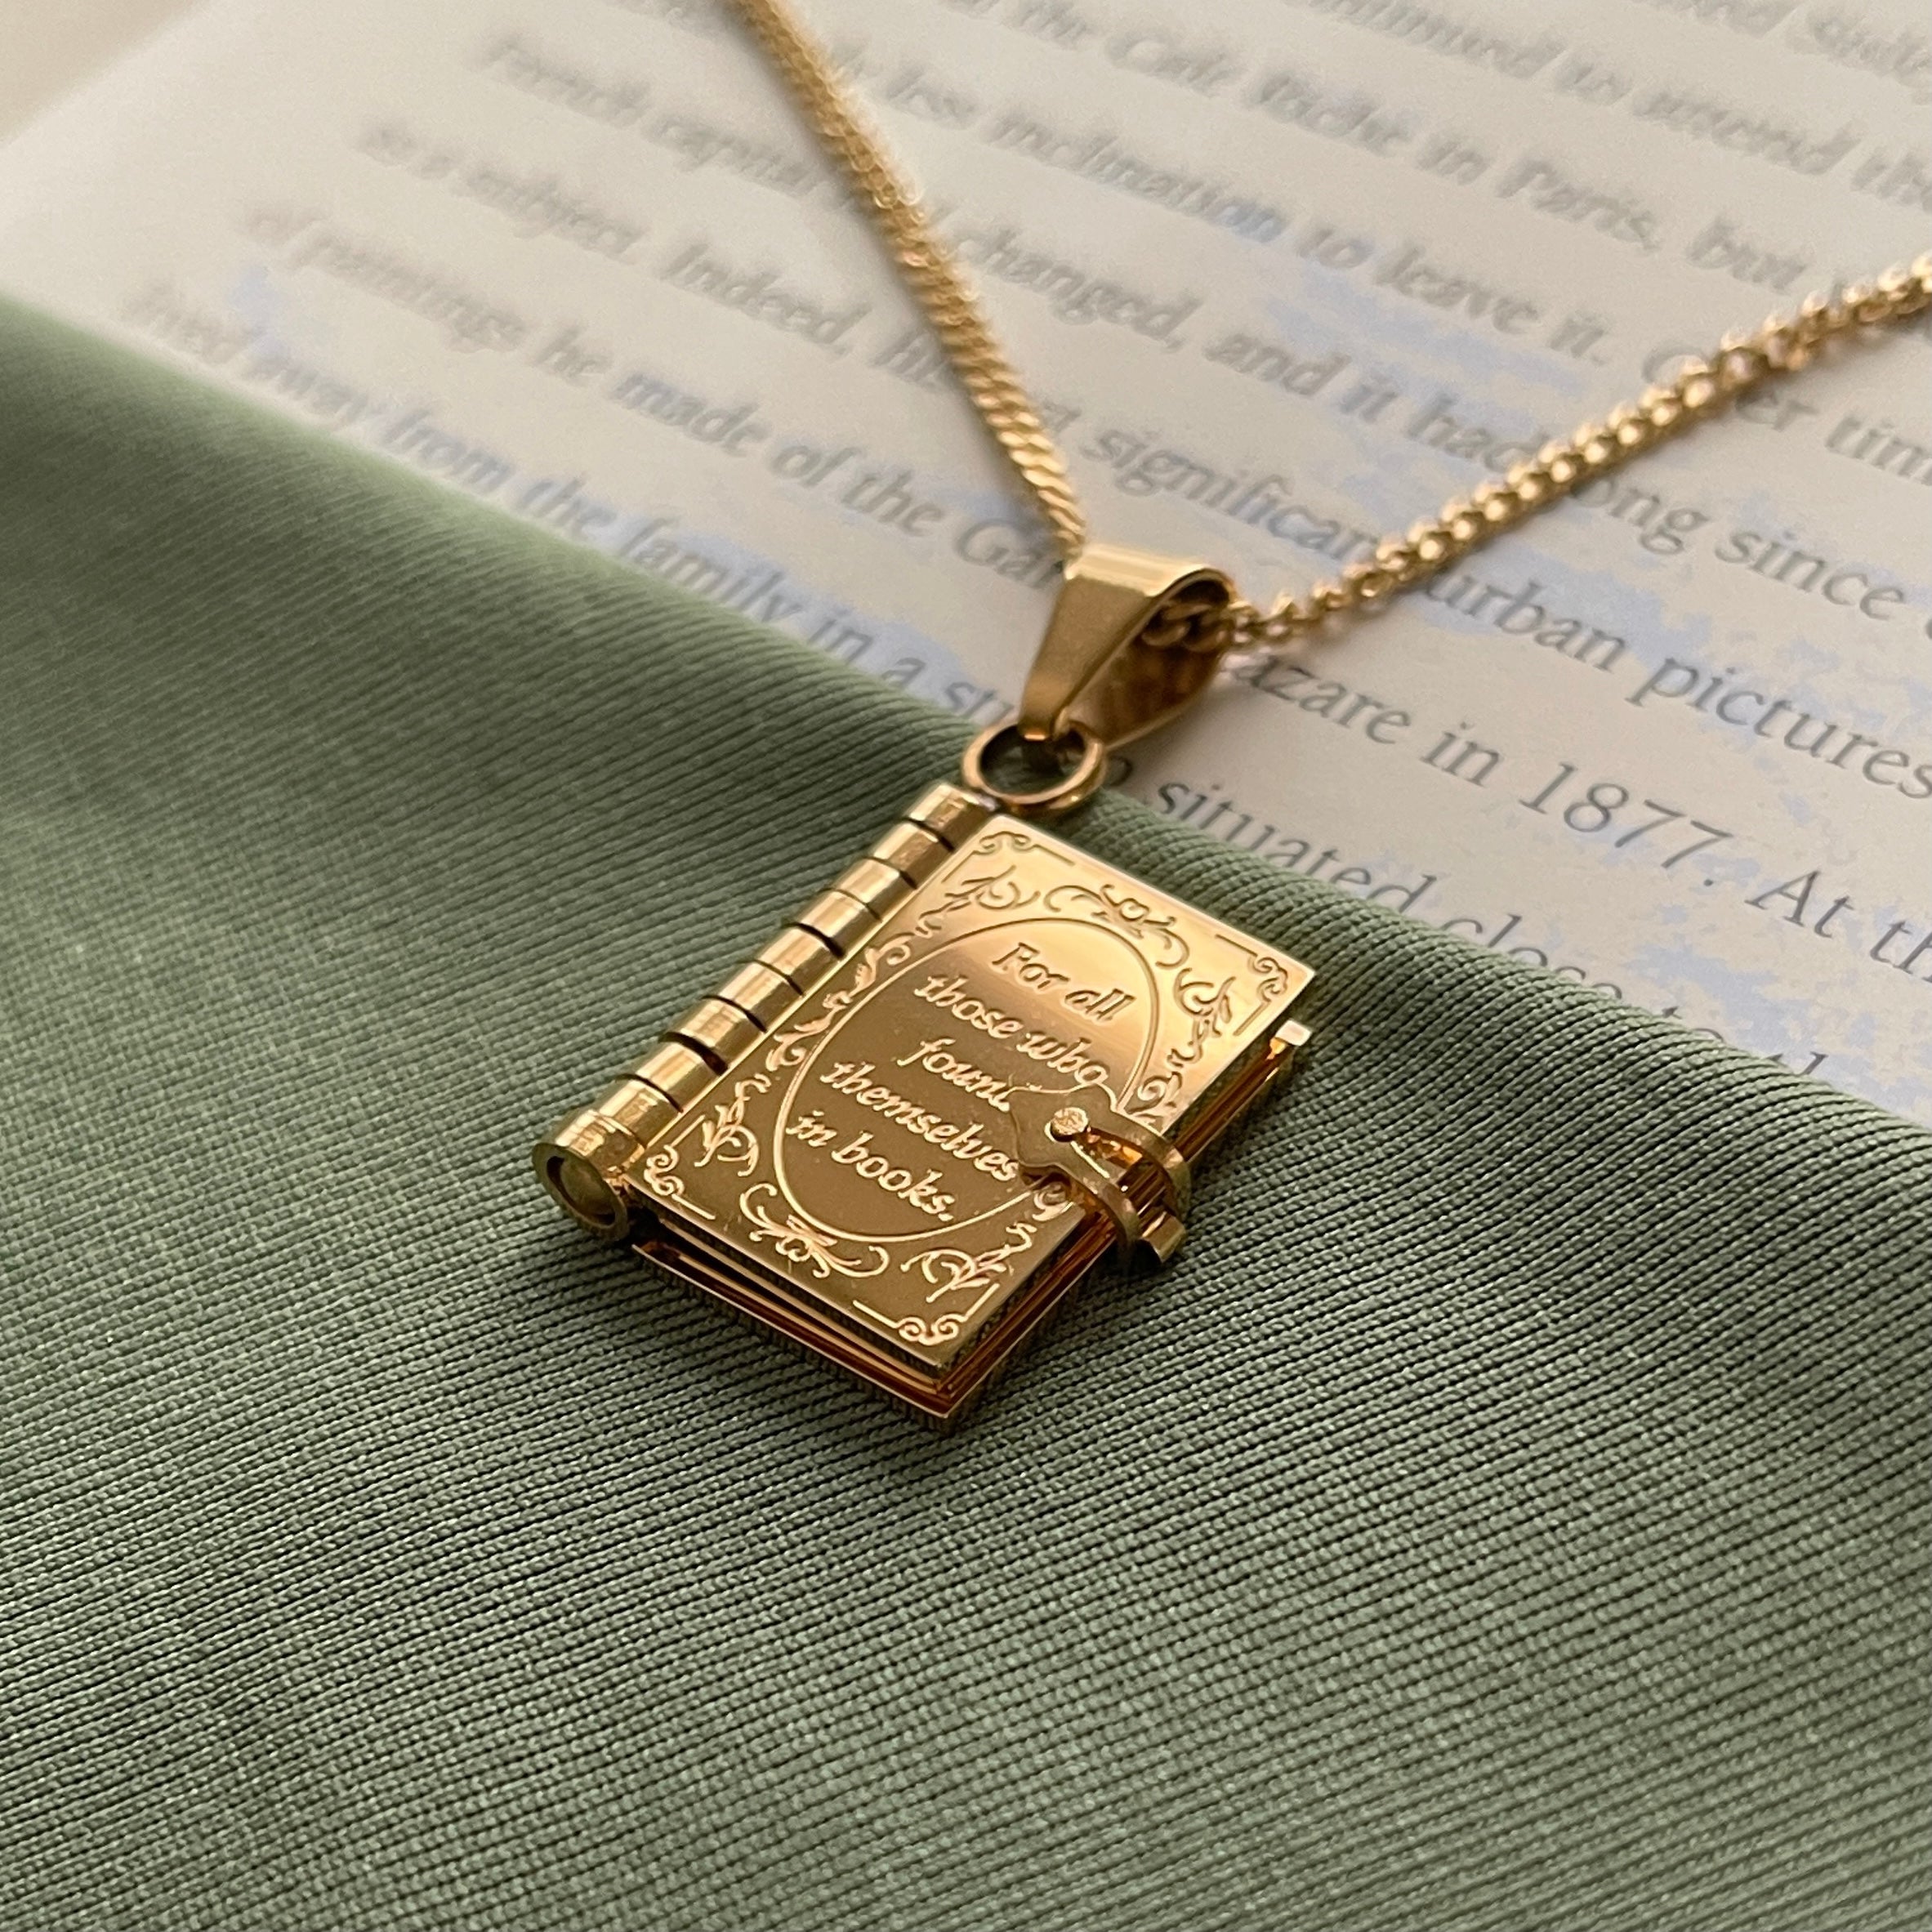 *PRE-ORDER LISTING* Book Lovers Necklace - PLEASE READ INFO